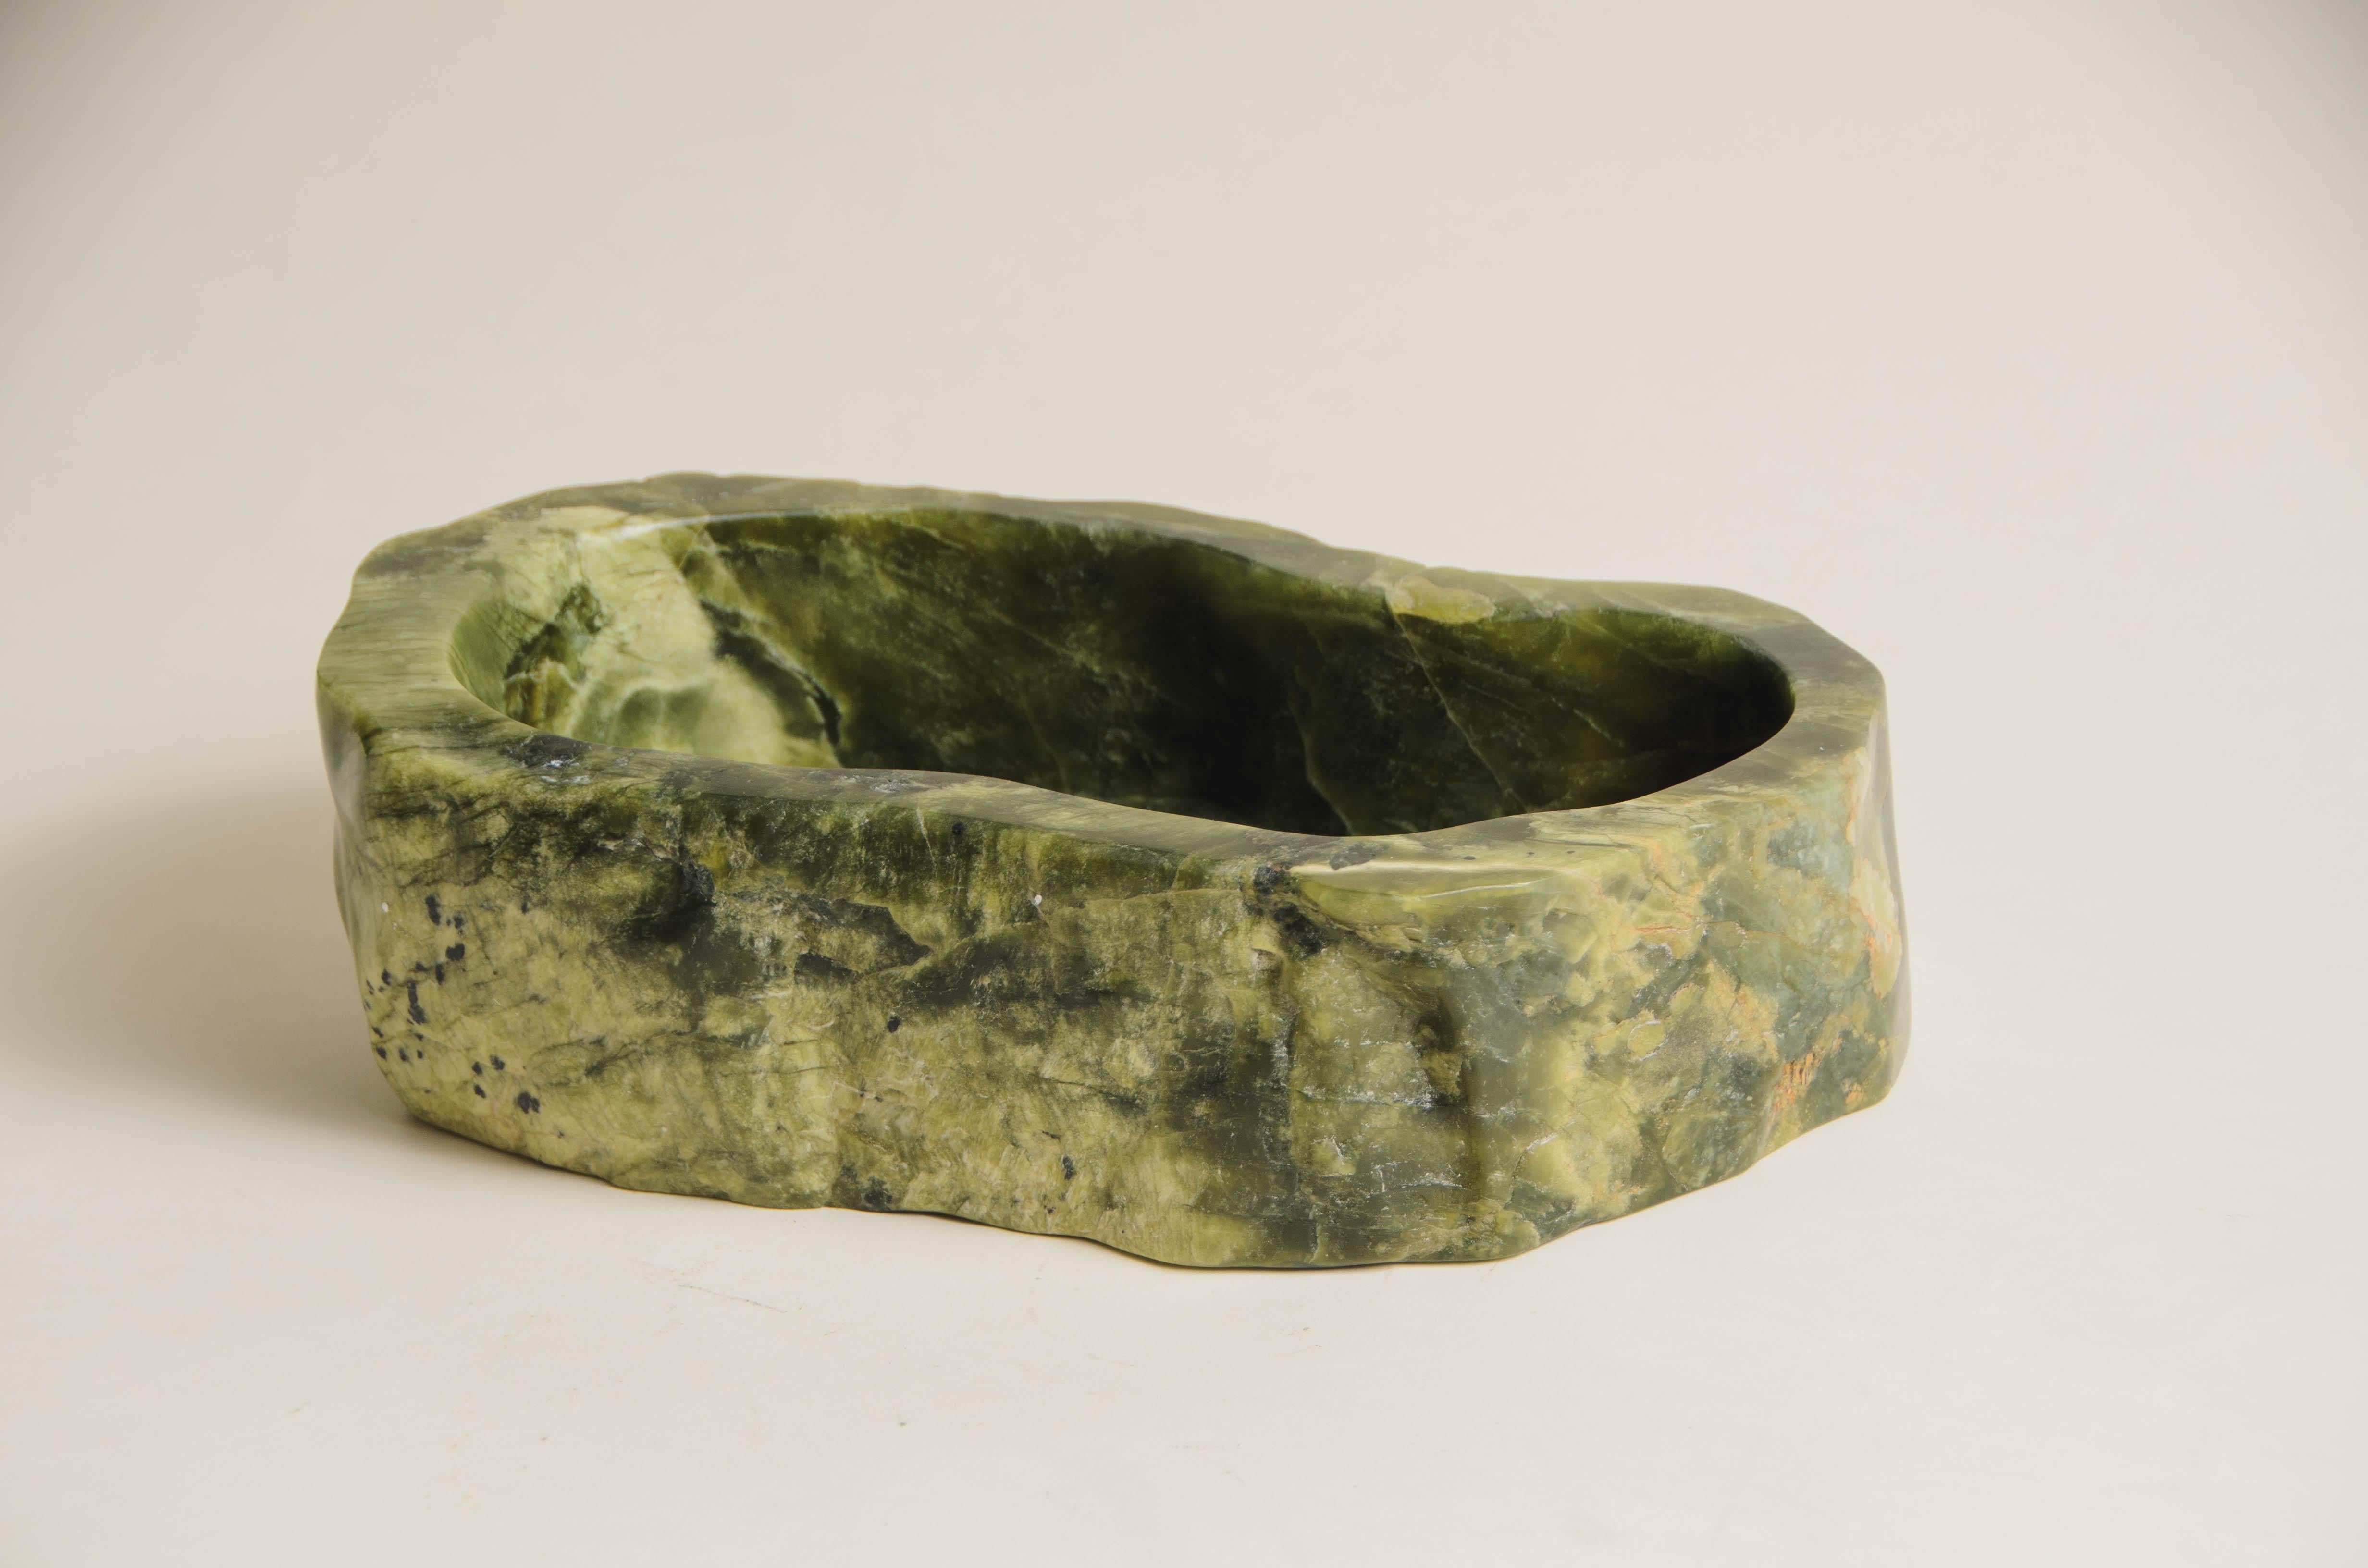 Contemporary Nephrite Jade Oblong Cachepot by Robert Kuo, Limited Edition For Sale 3